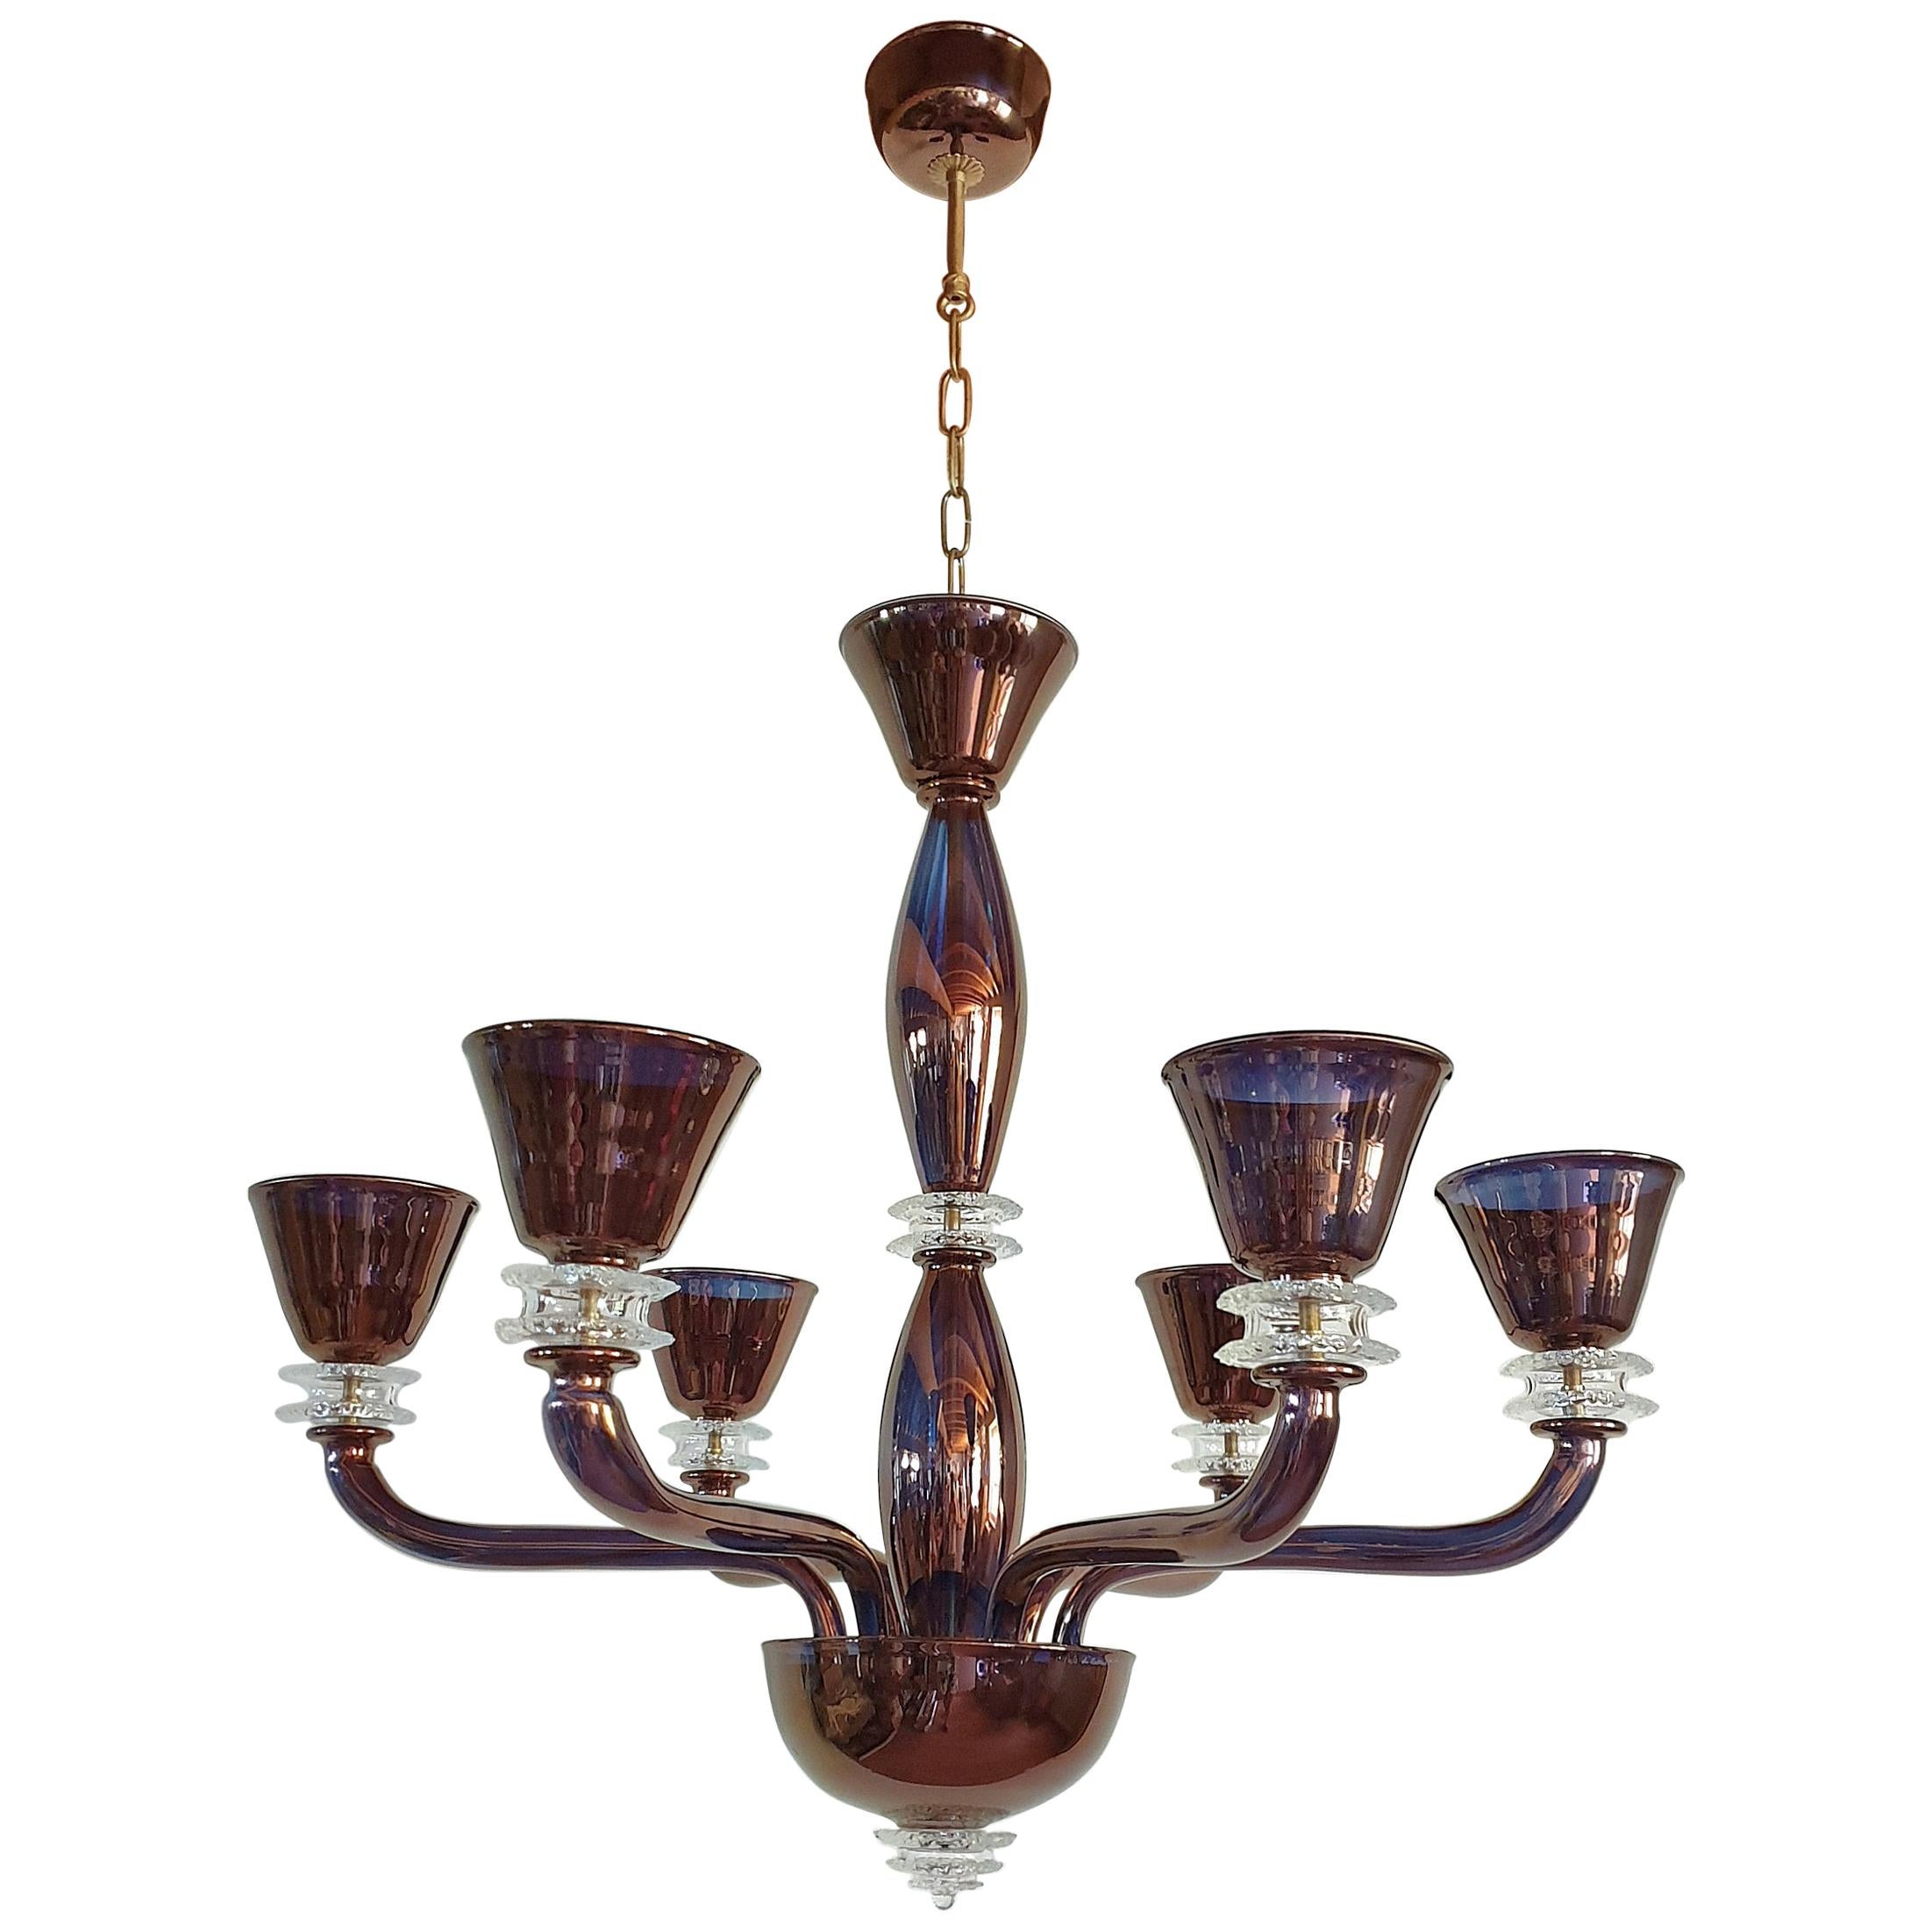 Large six lights Murano glass chandelier, Mid-Century Modern, attributed to Seguso, Italy, circa 1970s.
Very unique and elegant bronze color mirrored Murano glass: through the light, you can see some transparency, and color changing to blue.
The